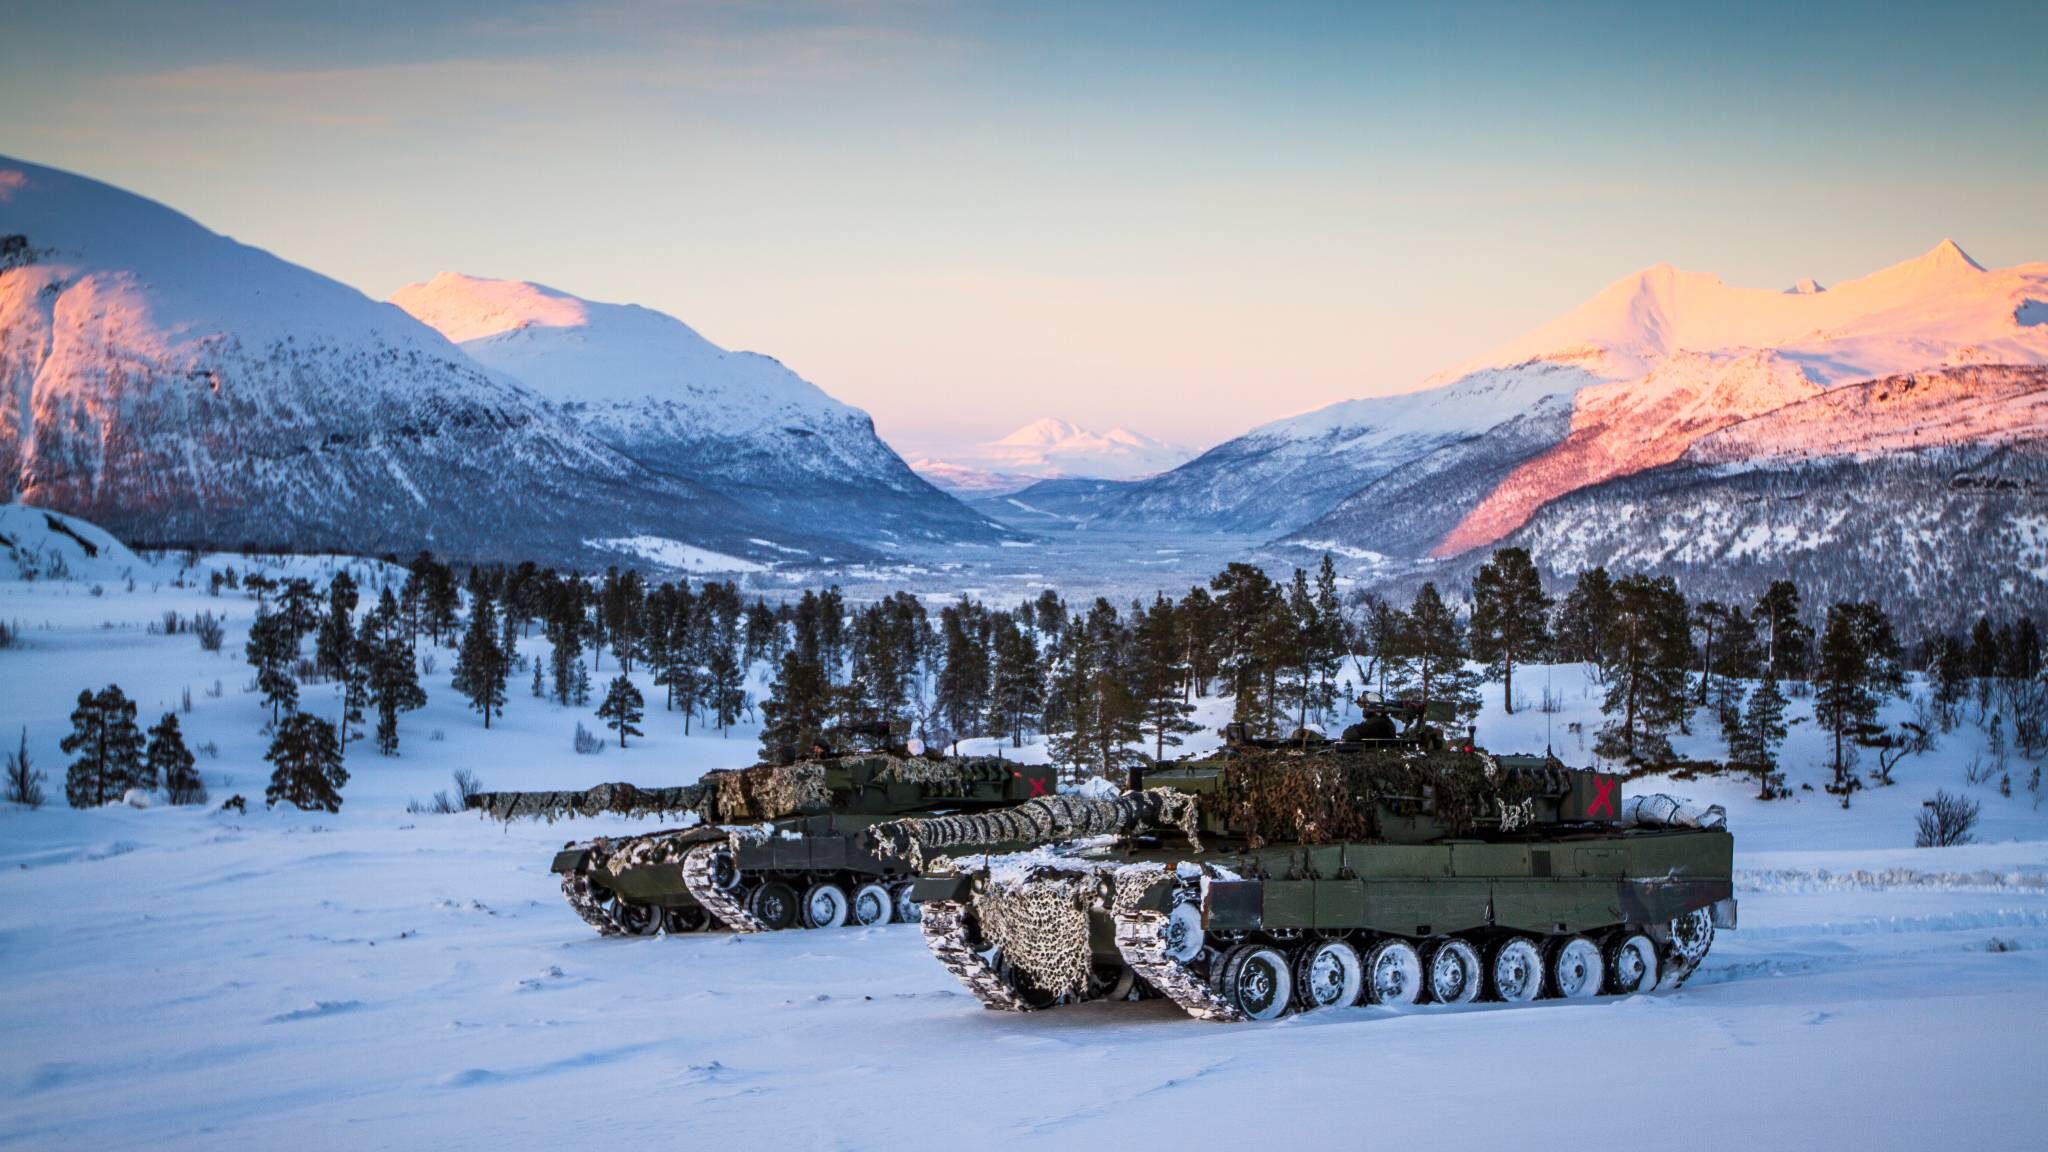 Norway will transfer 8 Leopard 2 tanks and 4 special purpose tanks to Ukraine